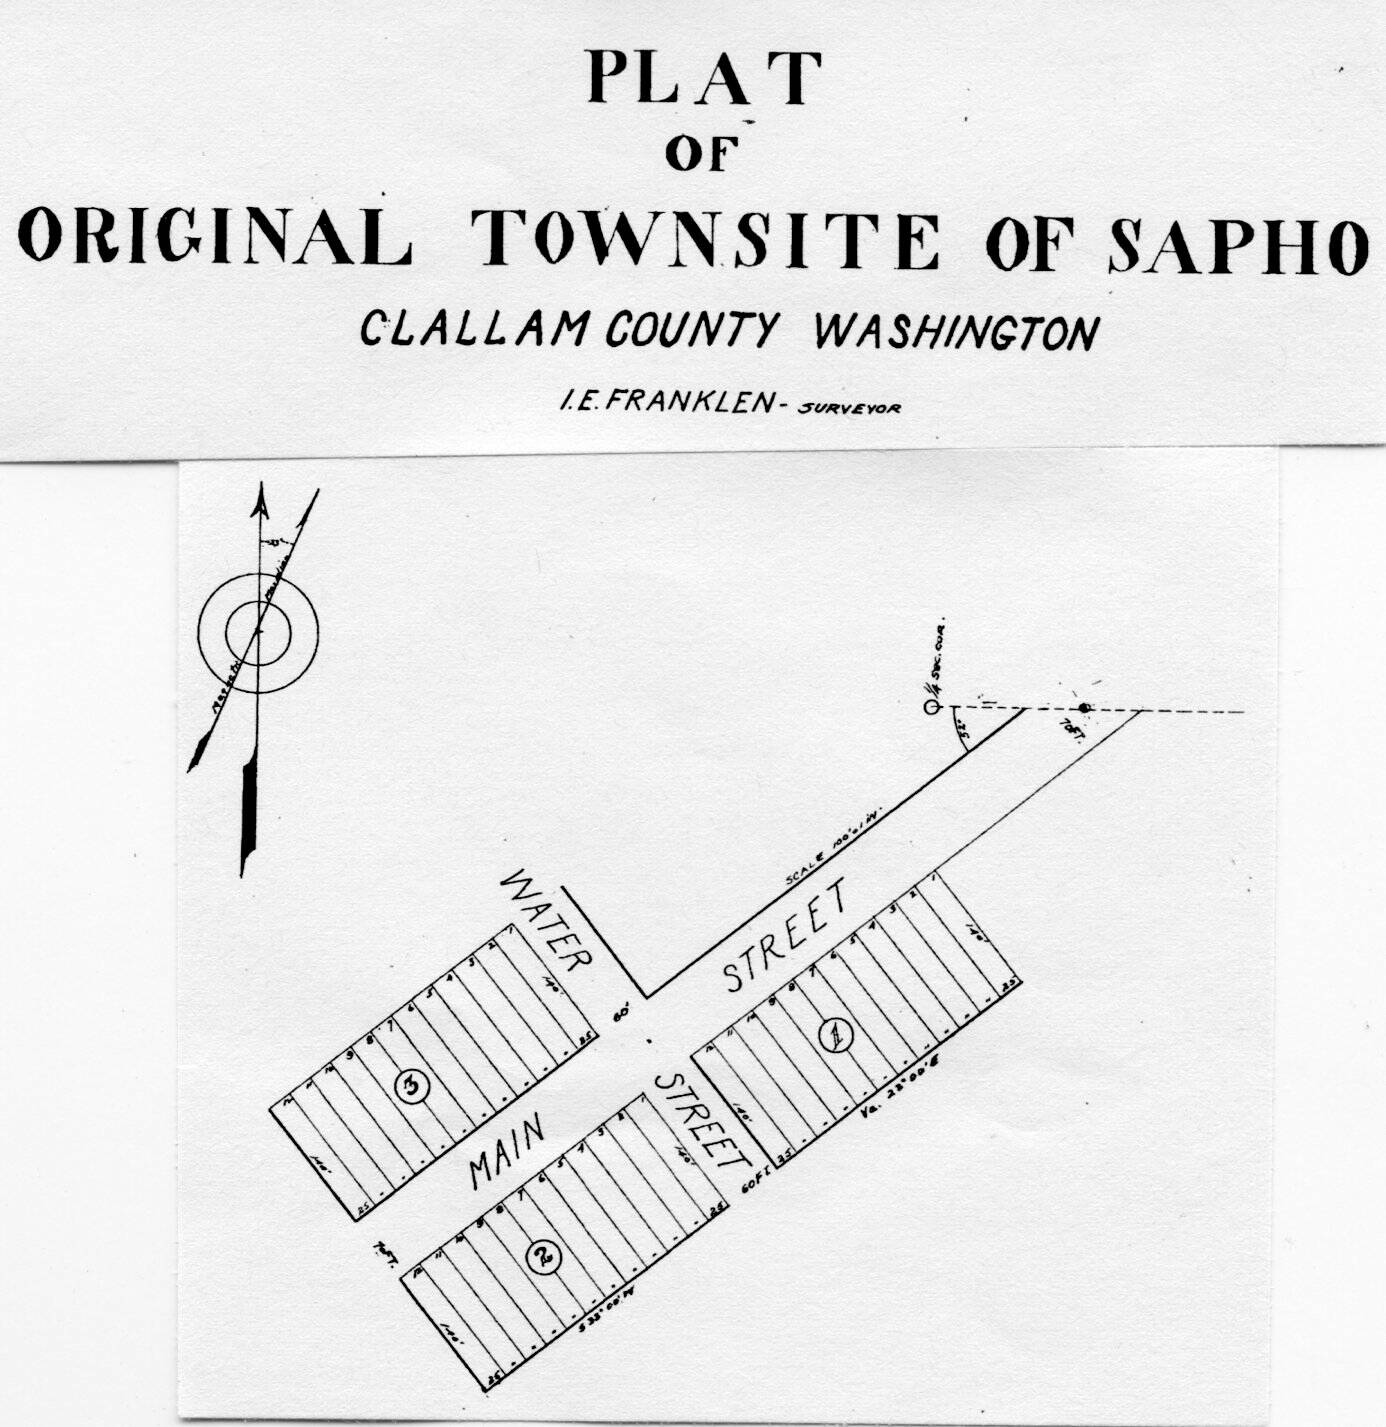 Street and property layout of Sapho. (PHOTO SUBMITTED BY JOHN MCNUTT)